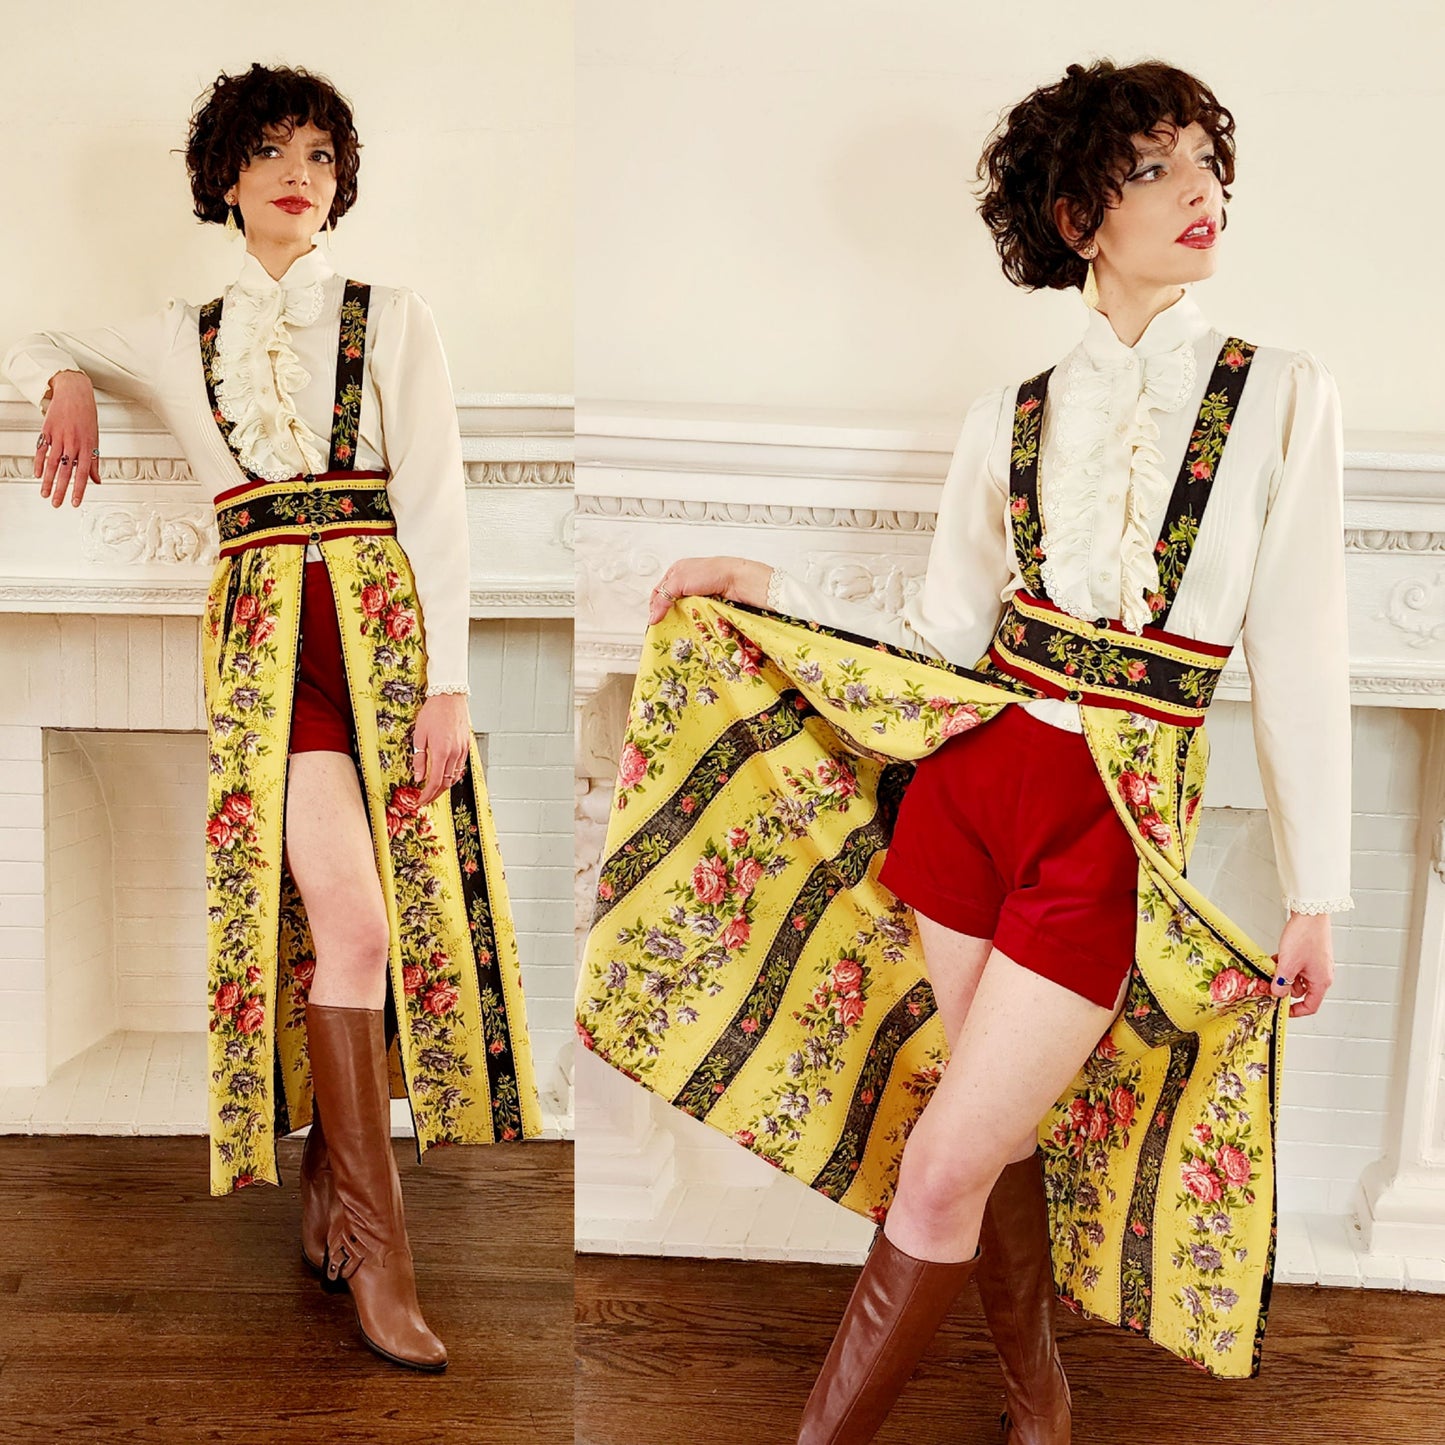 1970s Boho Ensemble of Shirt, Hot Pants-Shorts and Split Front Skirt by New Dimension/S